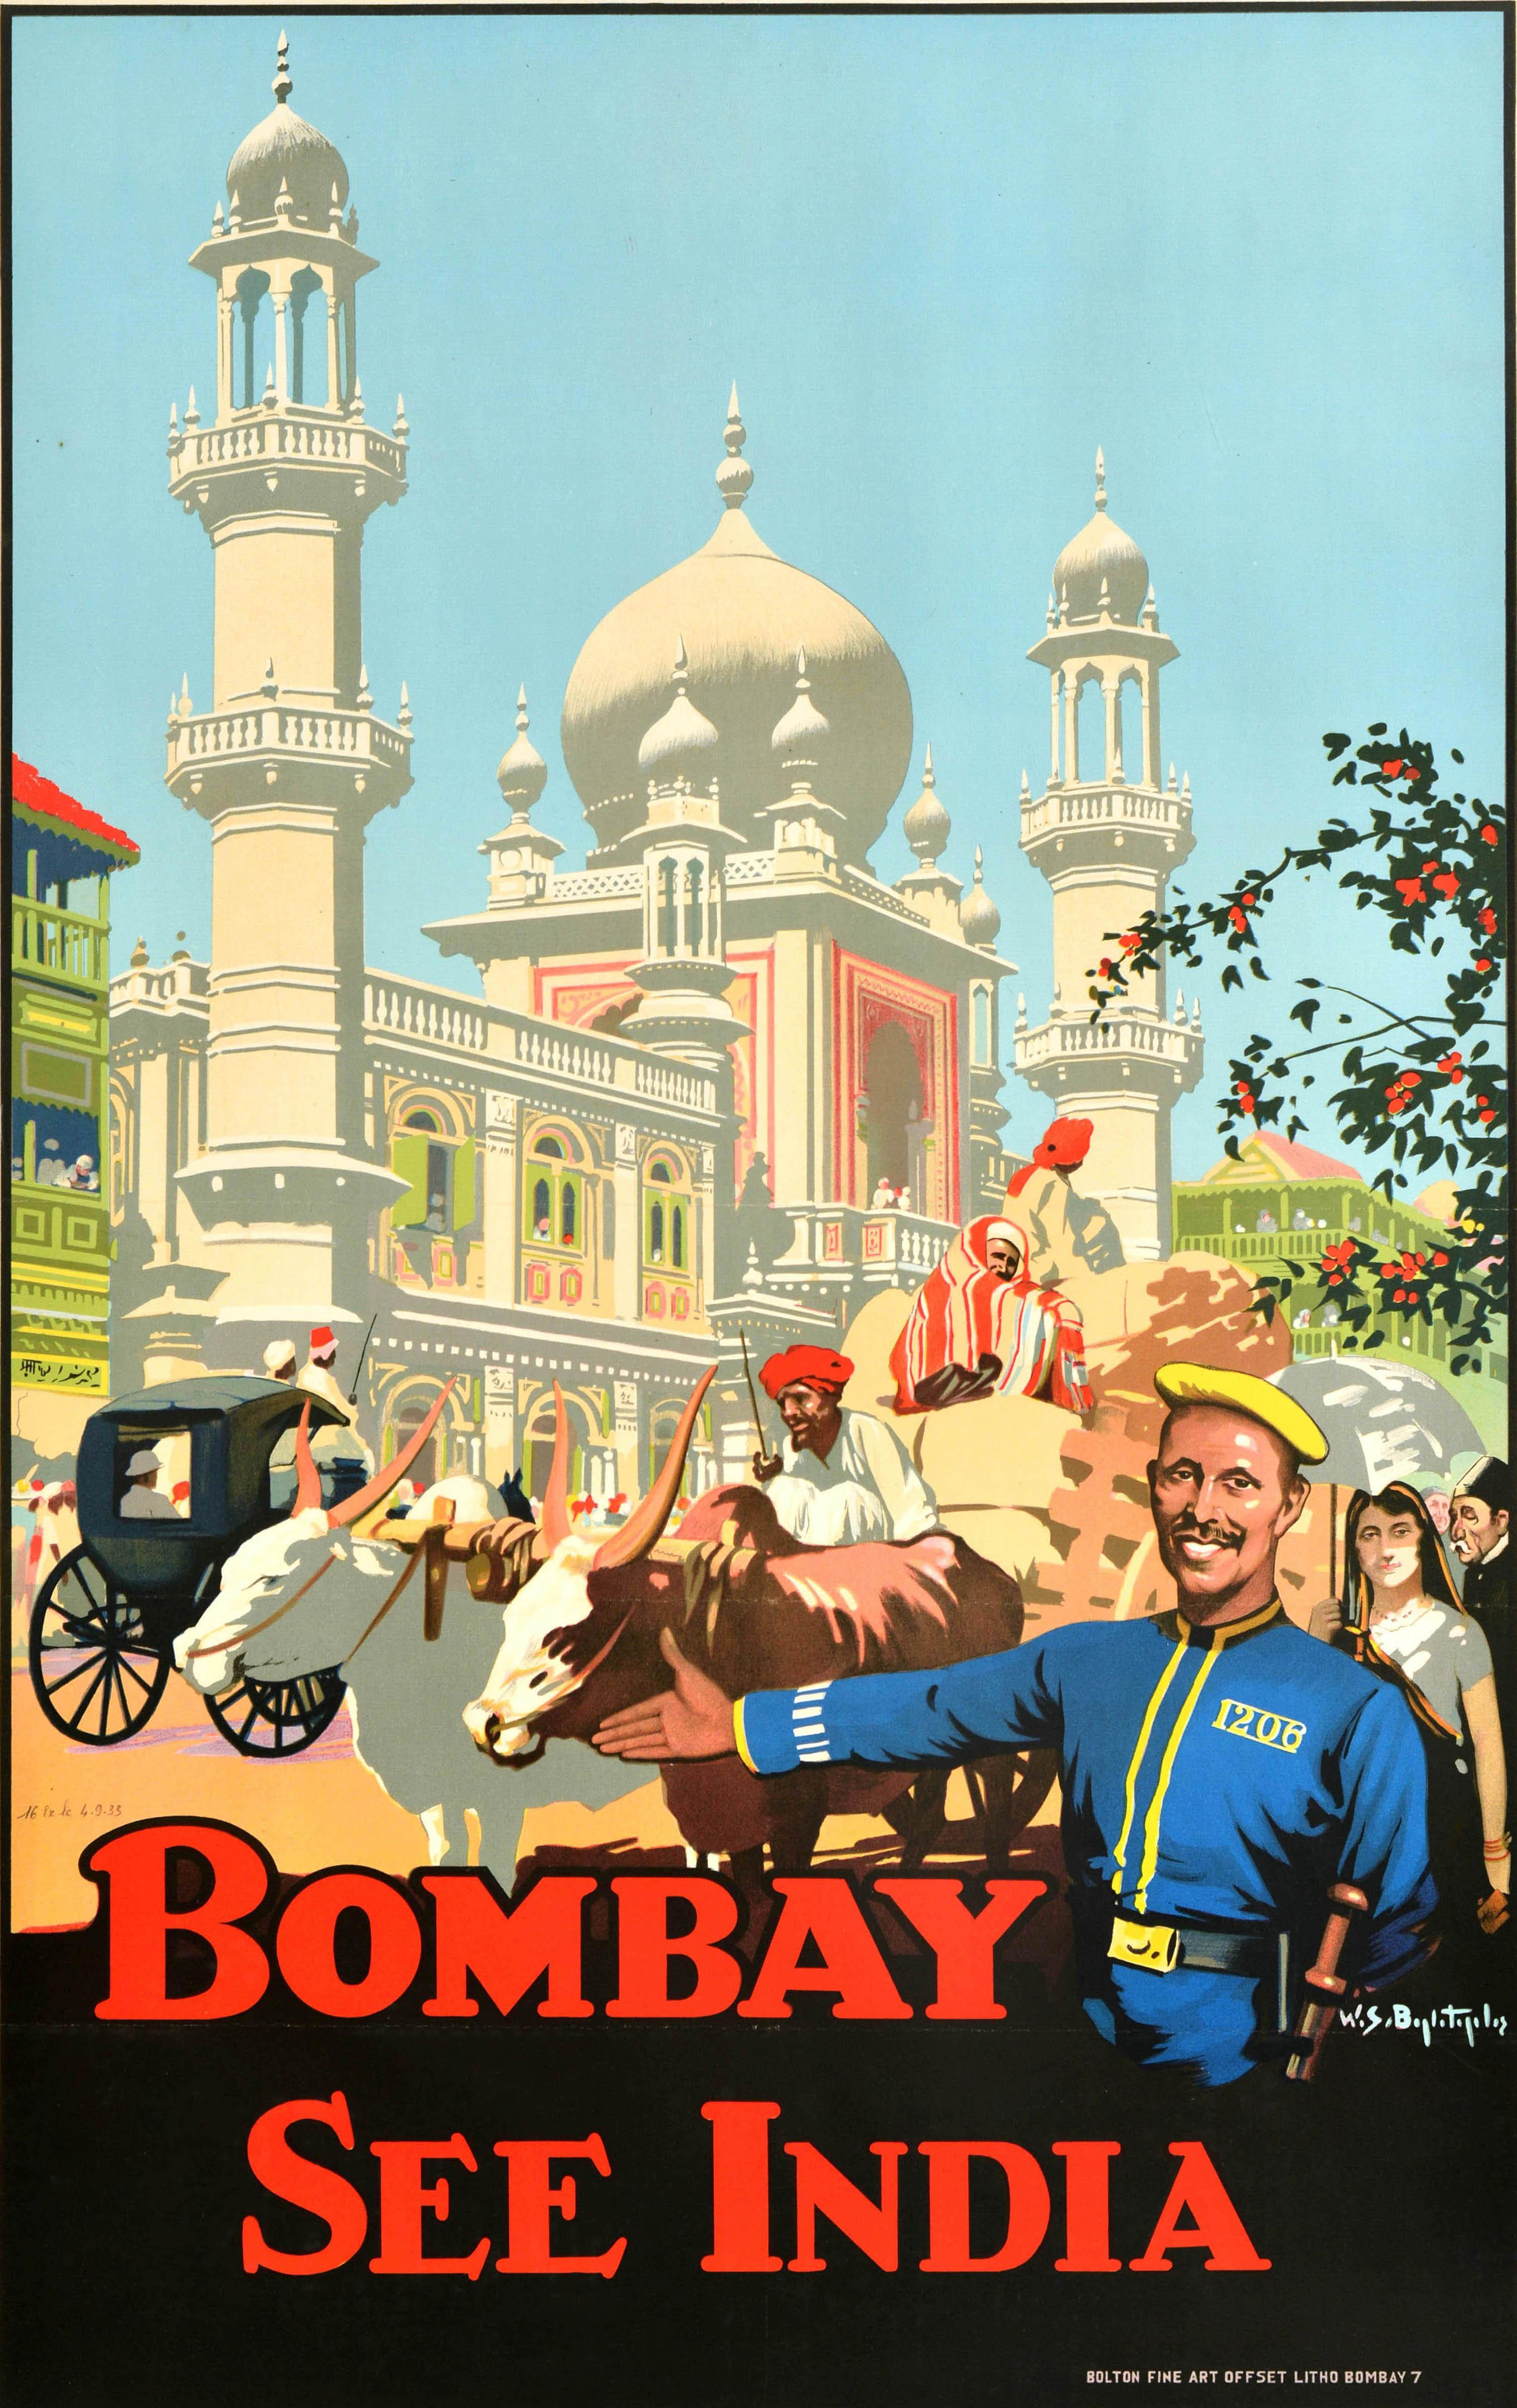 Original Vintage Travel Poster Bombay See India Mumbai Old Temple Street Design - Print by Unknown